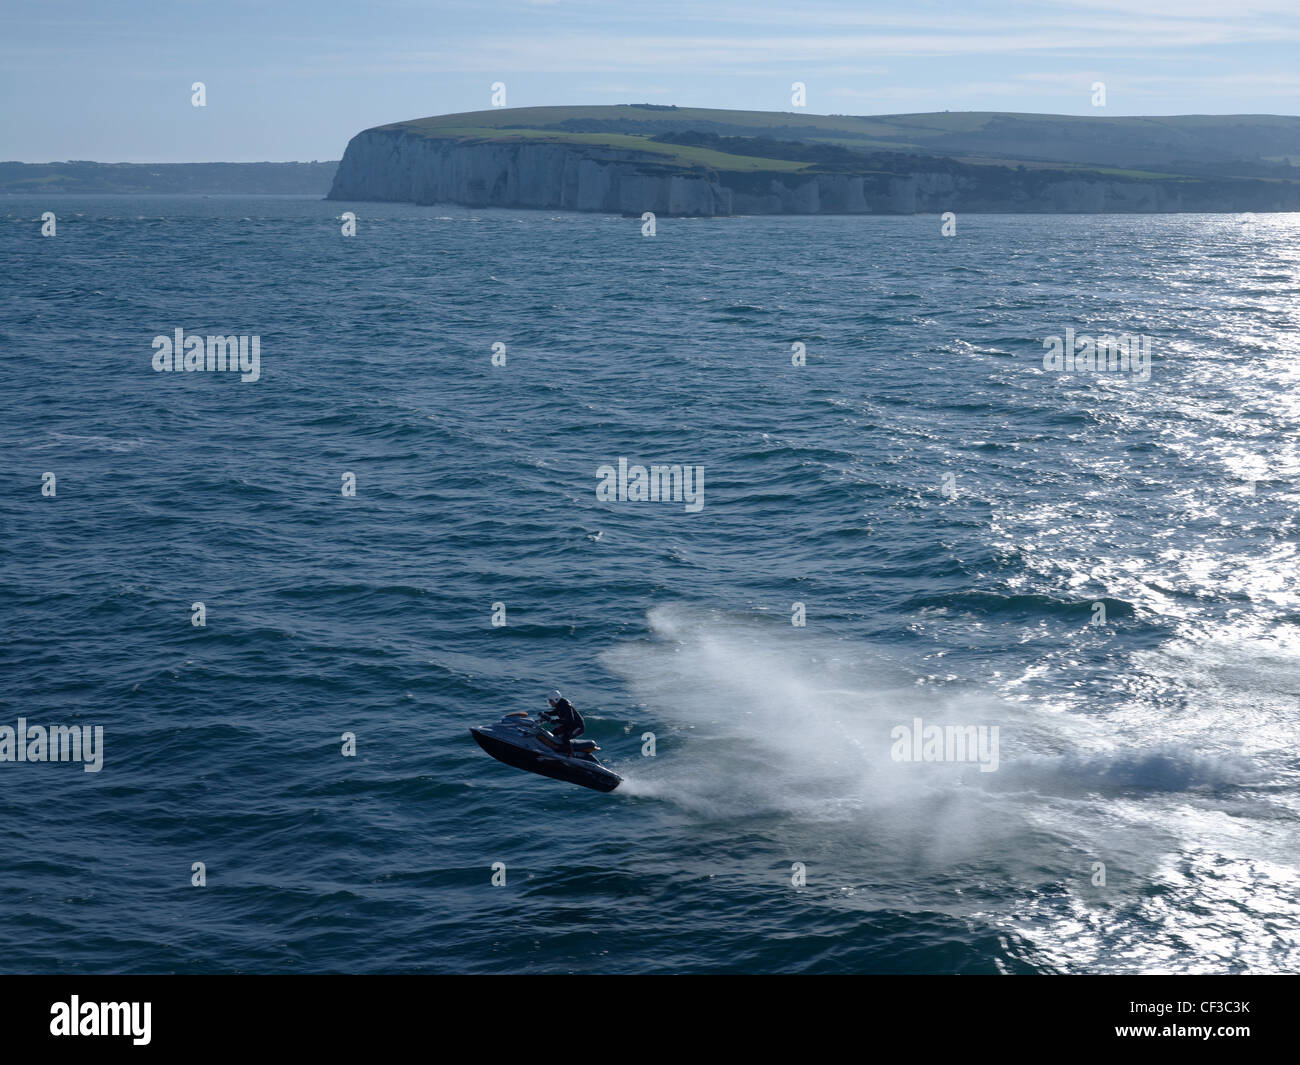 A jetskier jumping out of the sea with white cliffs and headland in the background. Stock Photo